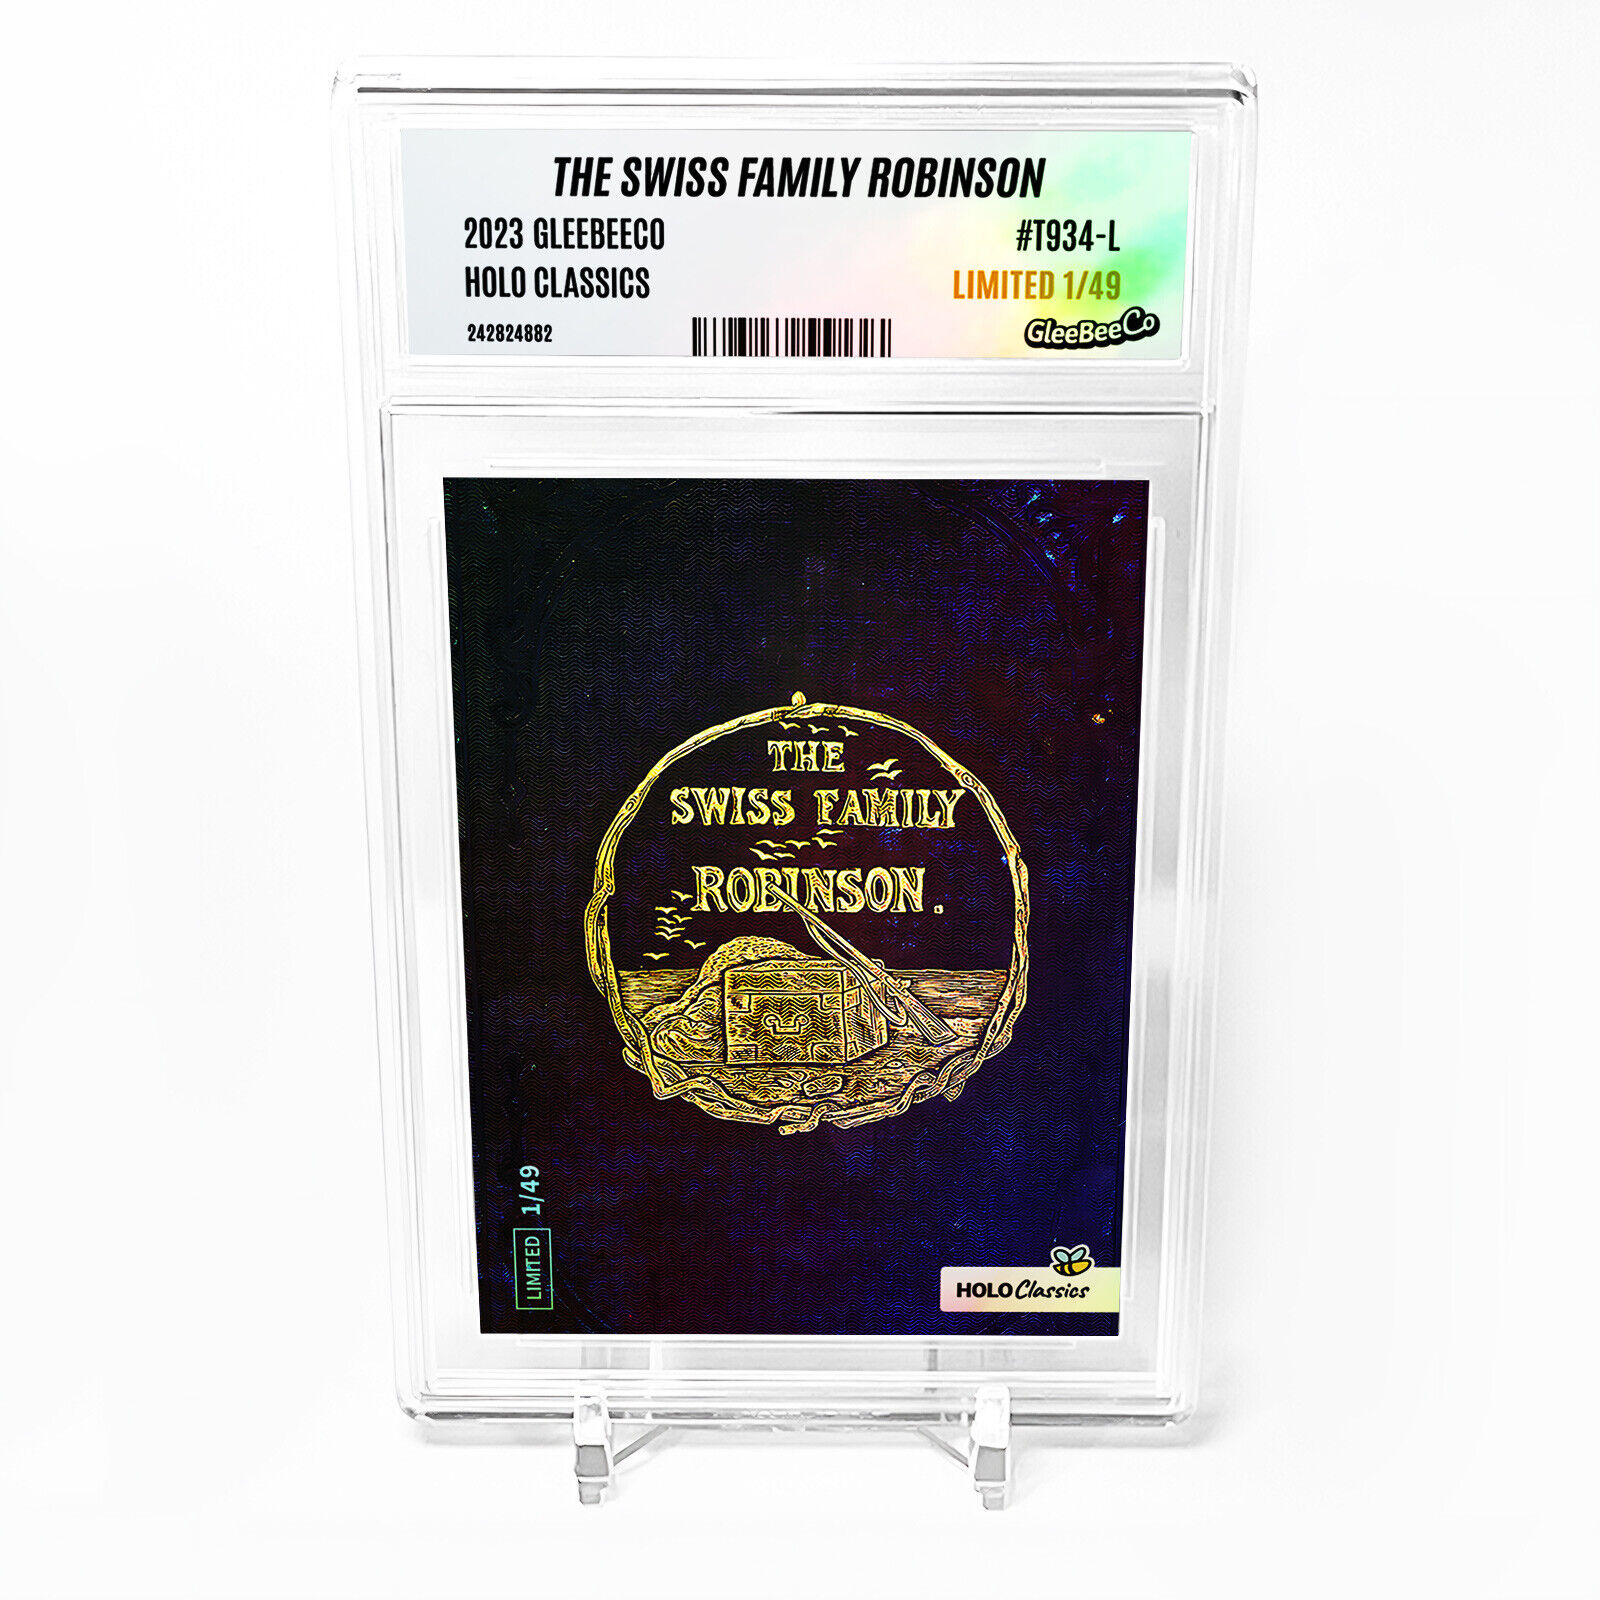 THE SWISS FAMILY ROBINSON Holographic Card 2023 GleeBeeCo #T934-L LIMITED to /49